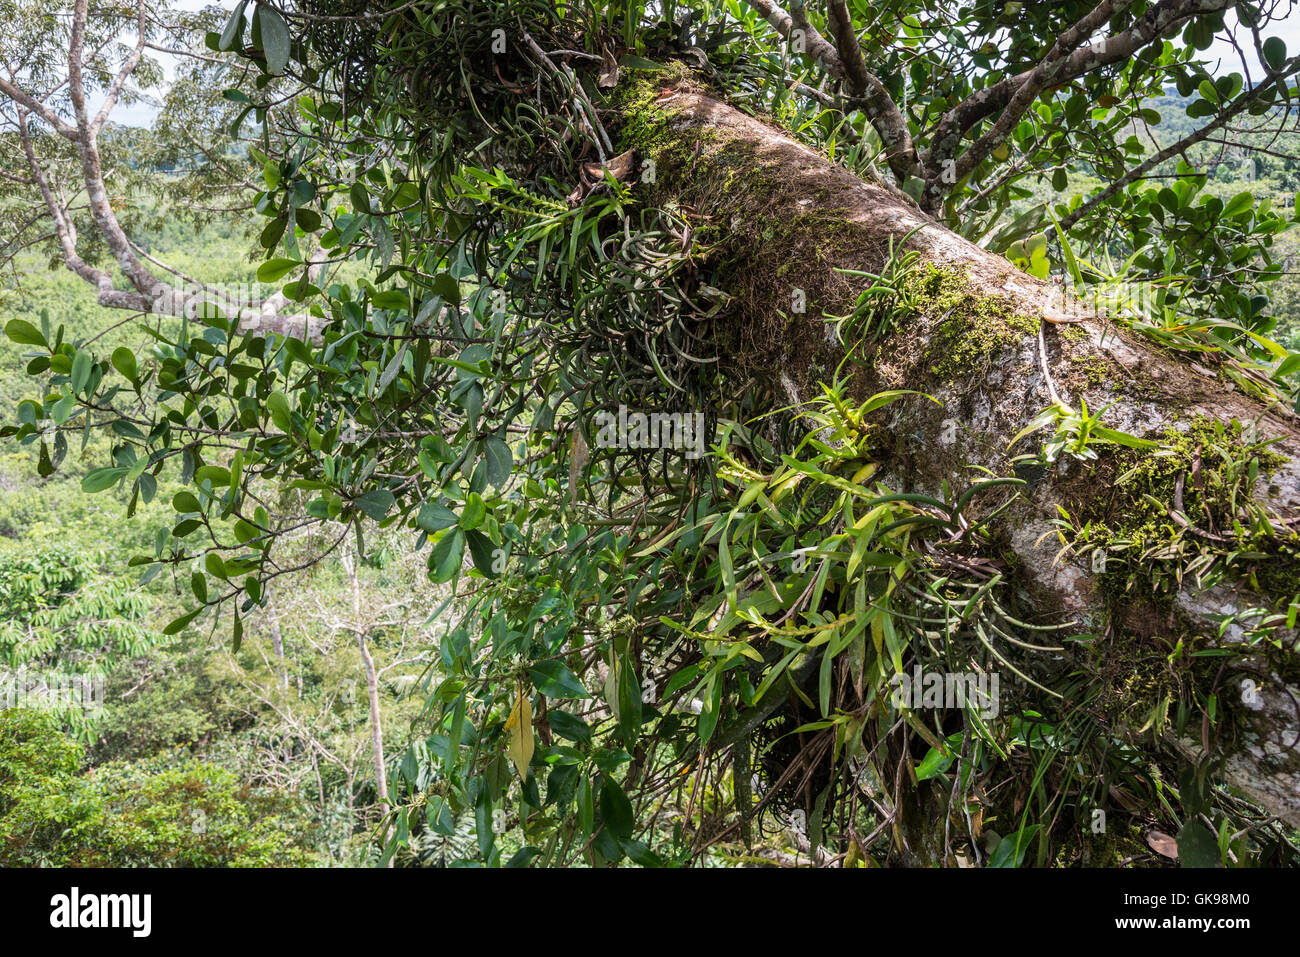 Tree trunk loaded with epiphytes such as bromeliads and orchids in the Amazons. Yasuni National Park, Ecuador, South America. Stock Photo